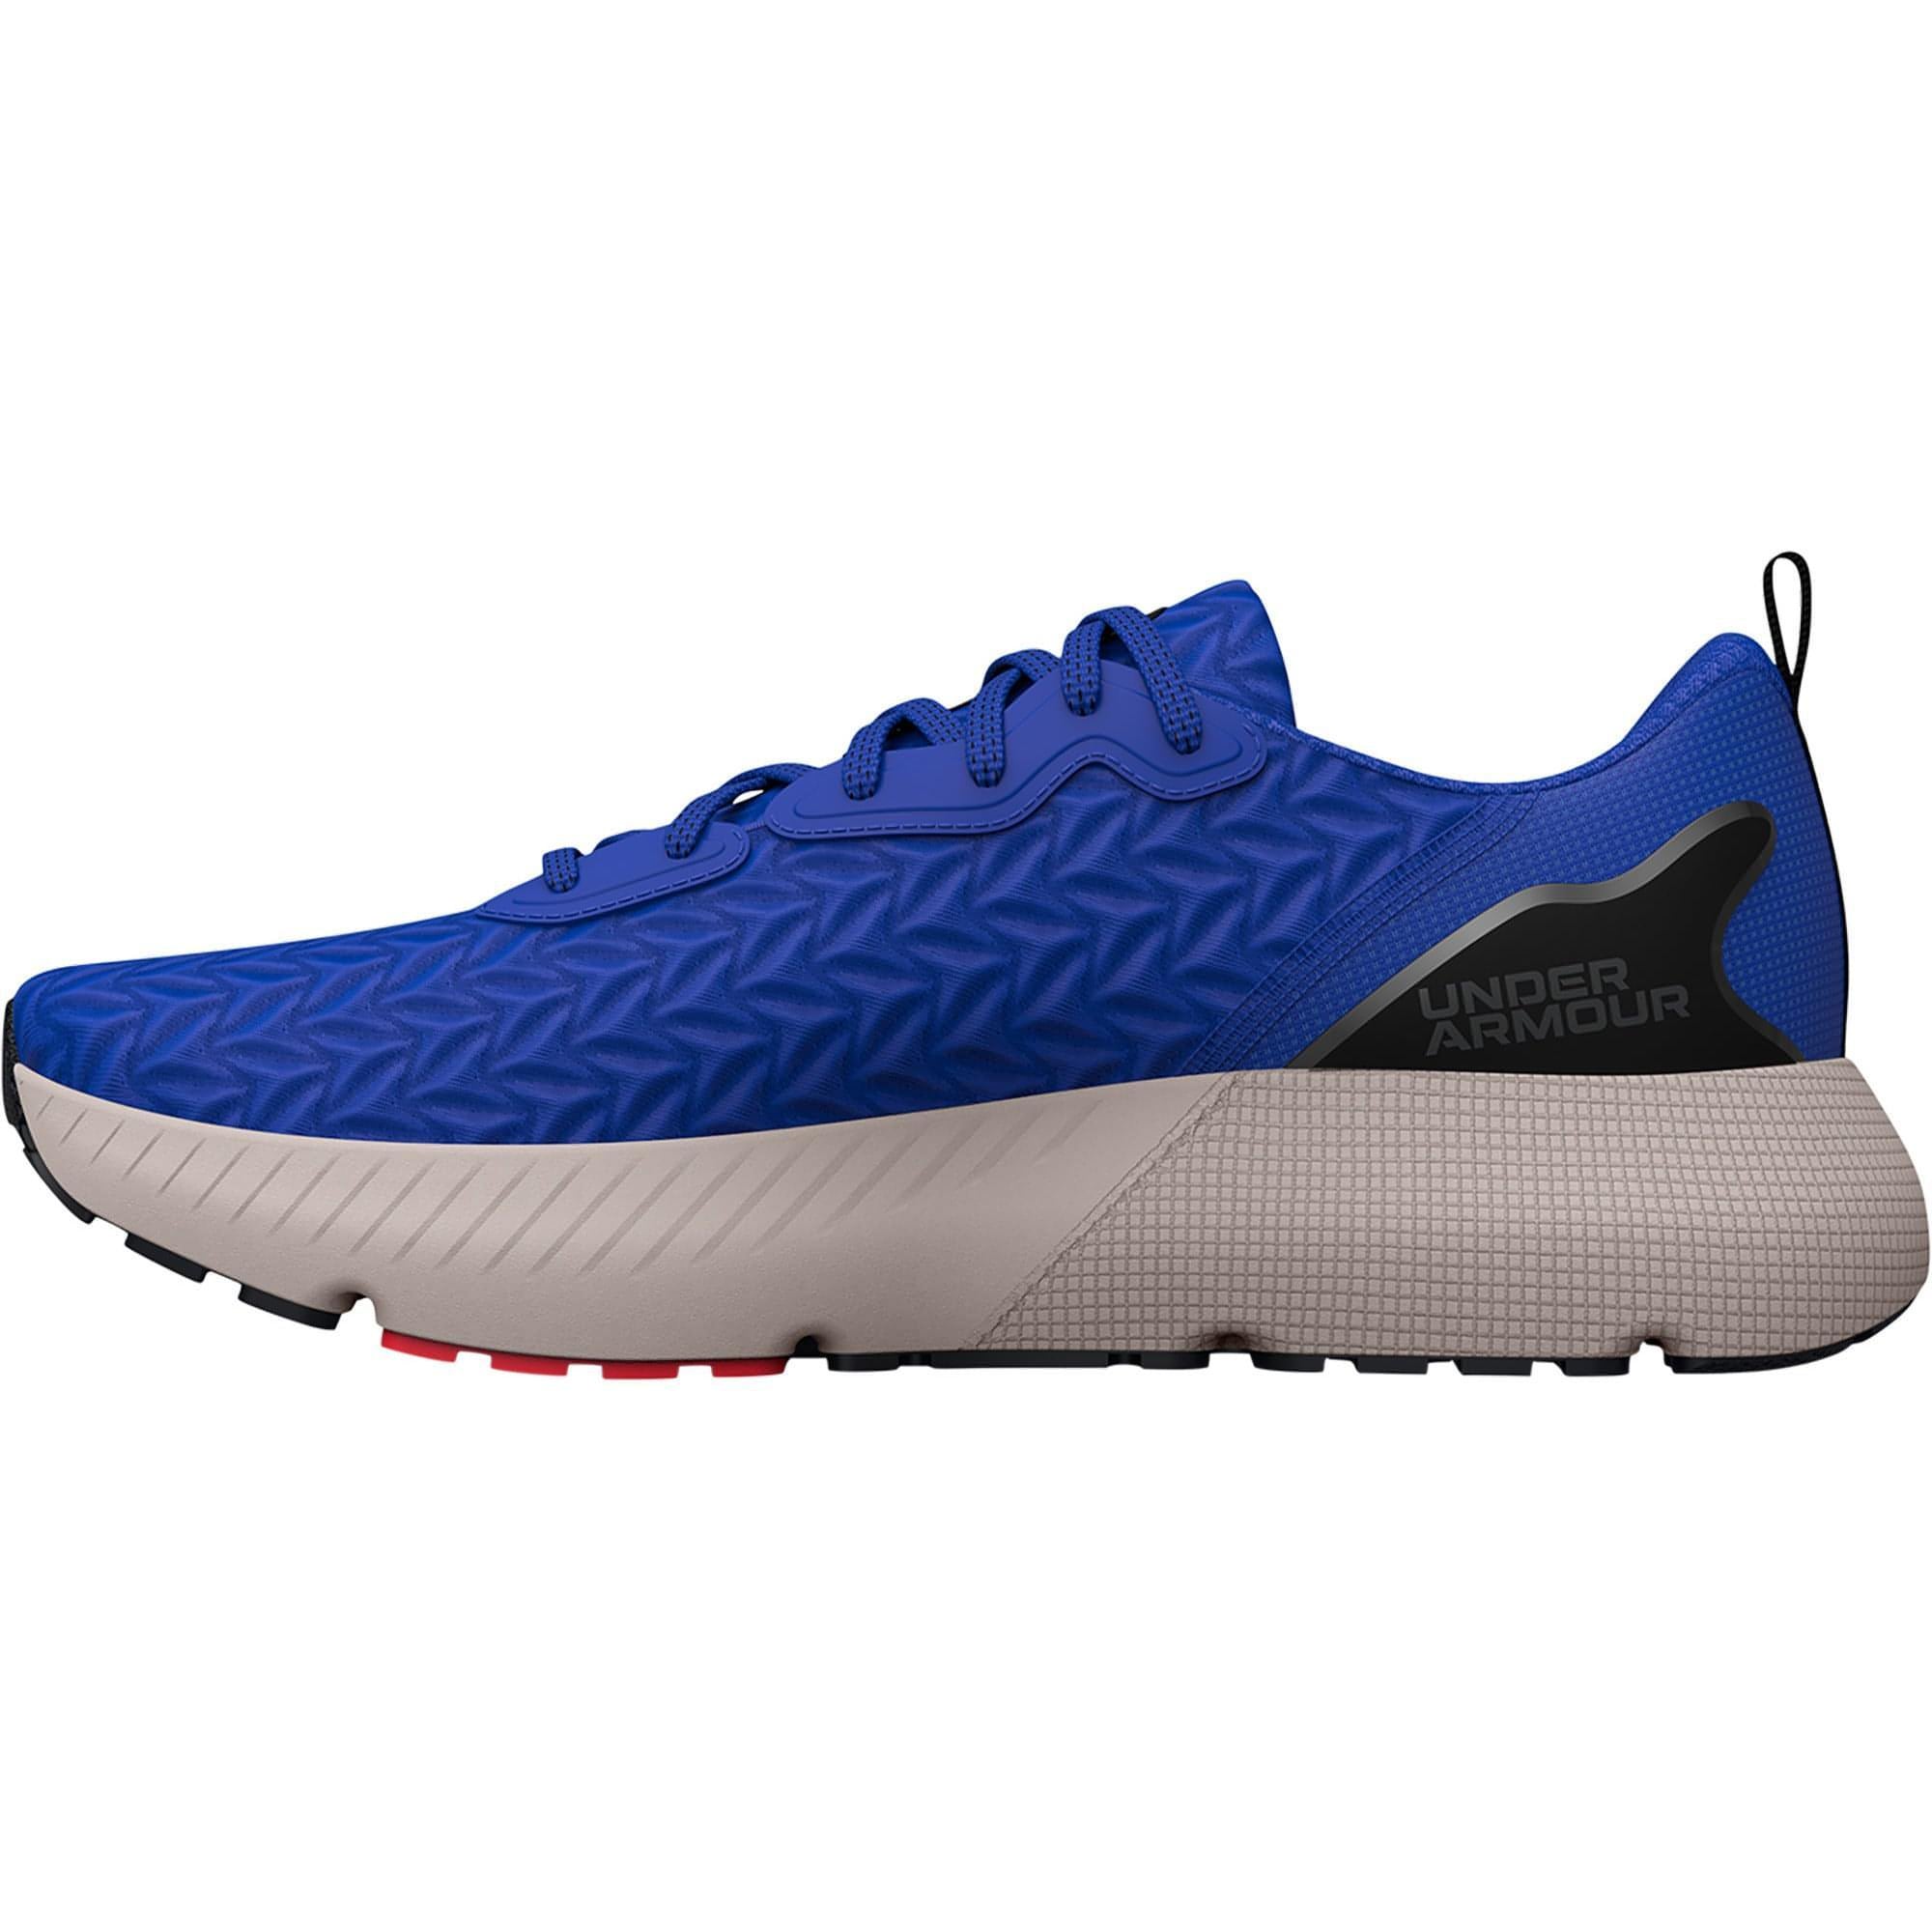 Under Armour HOVR Mega 3 Clone Mens Running Shoes - Blue